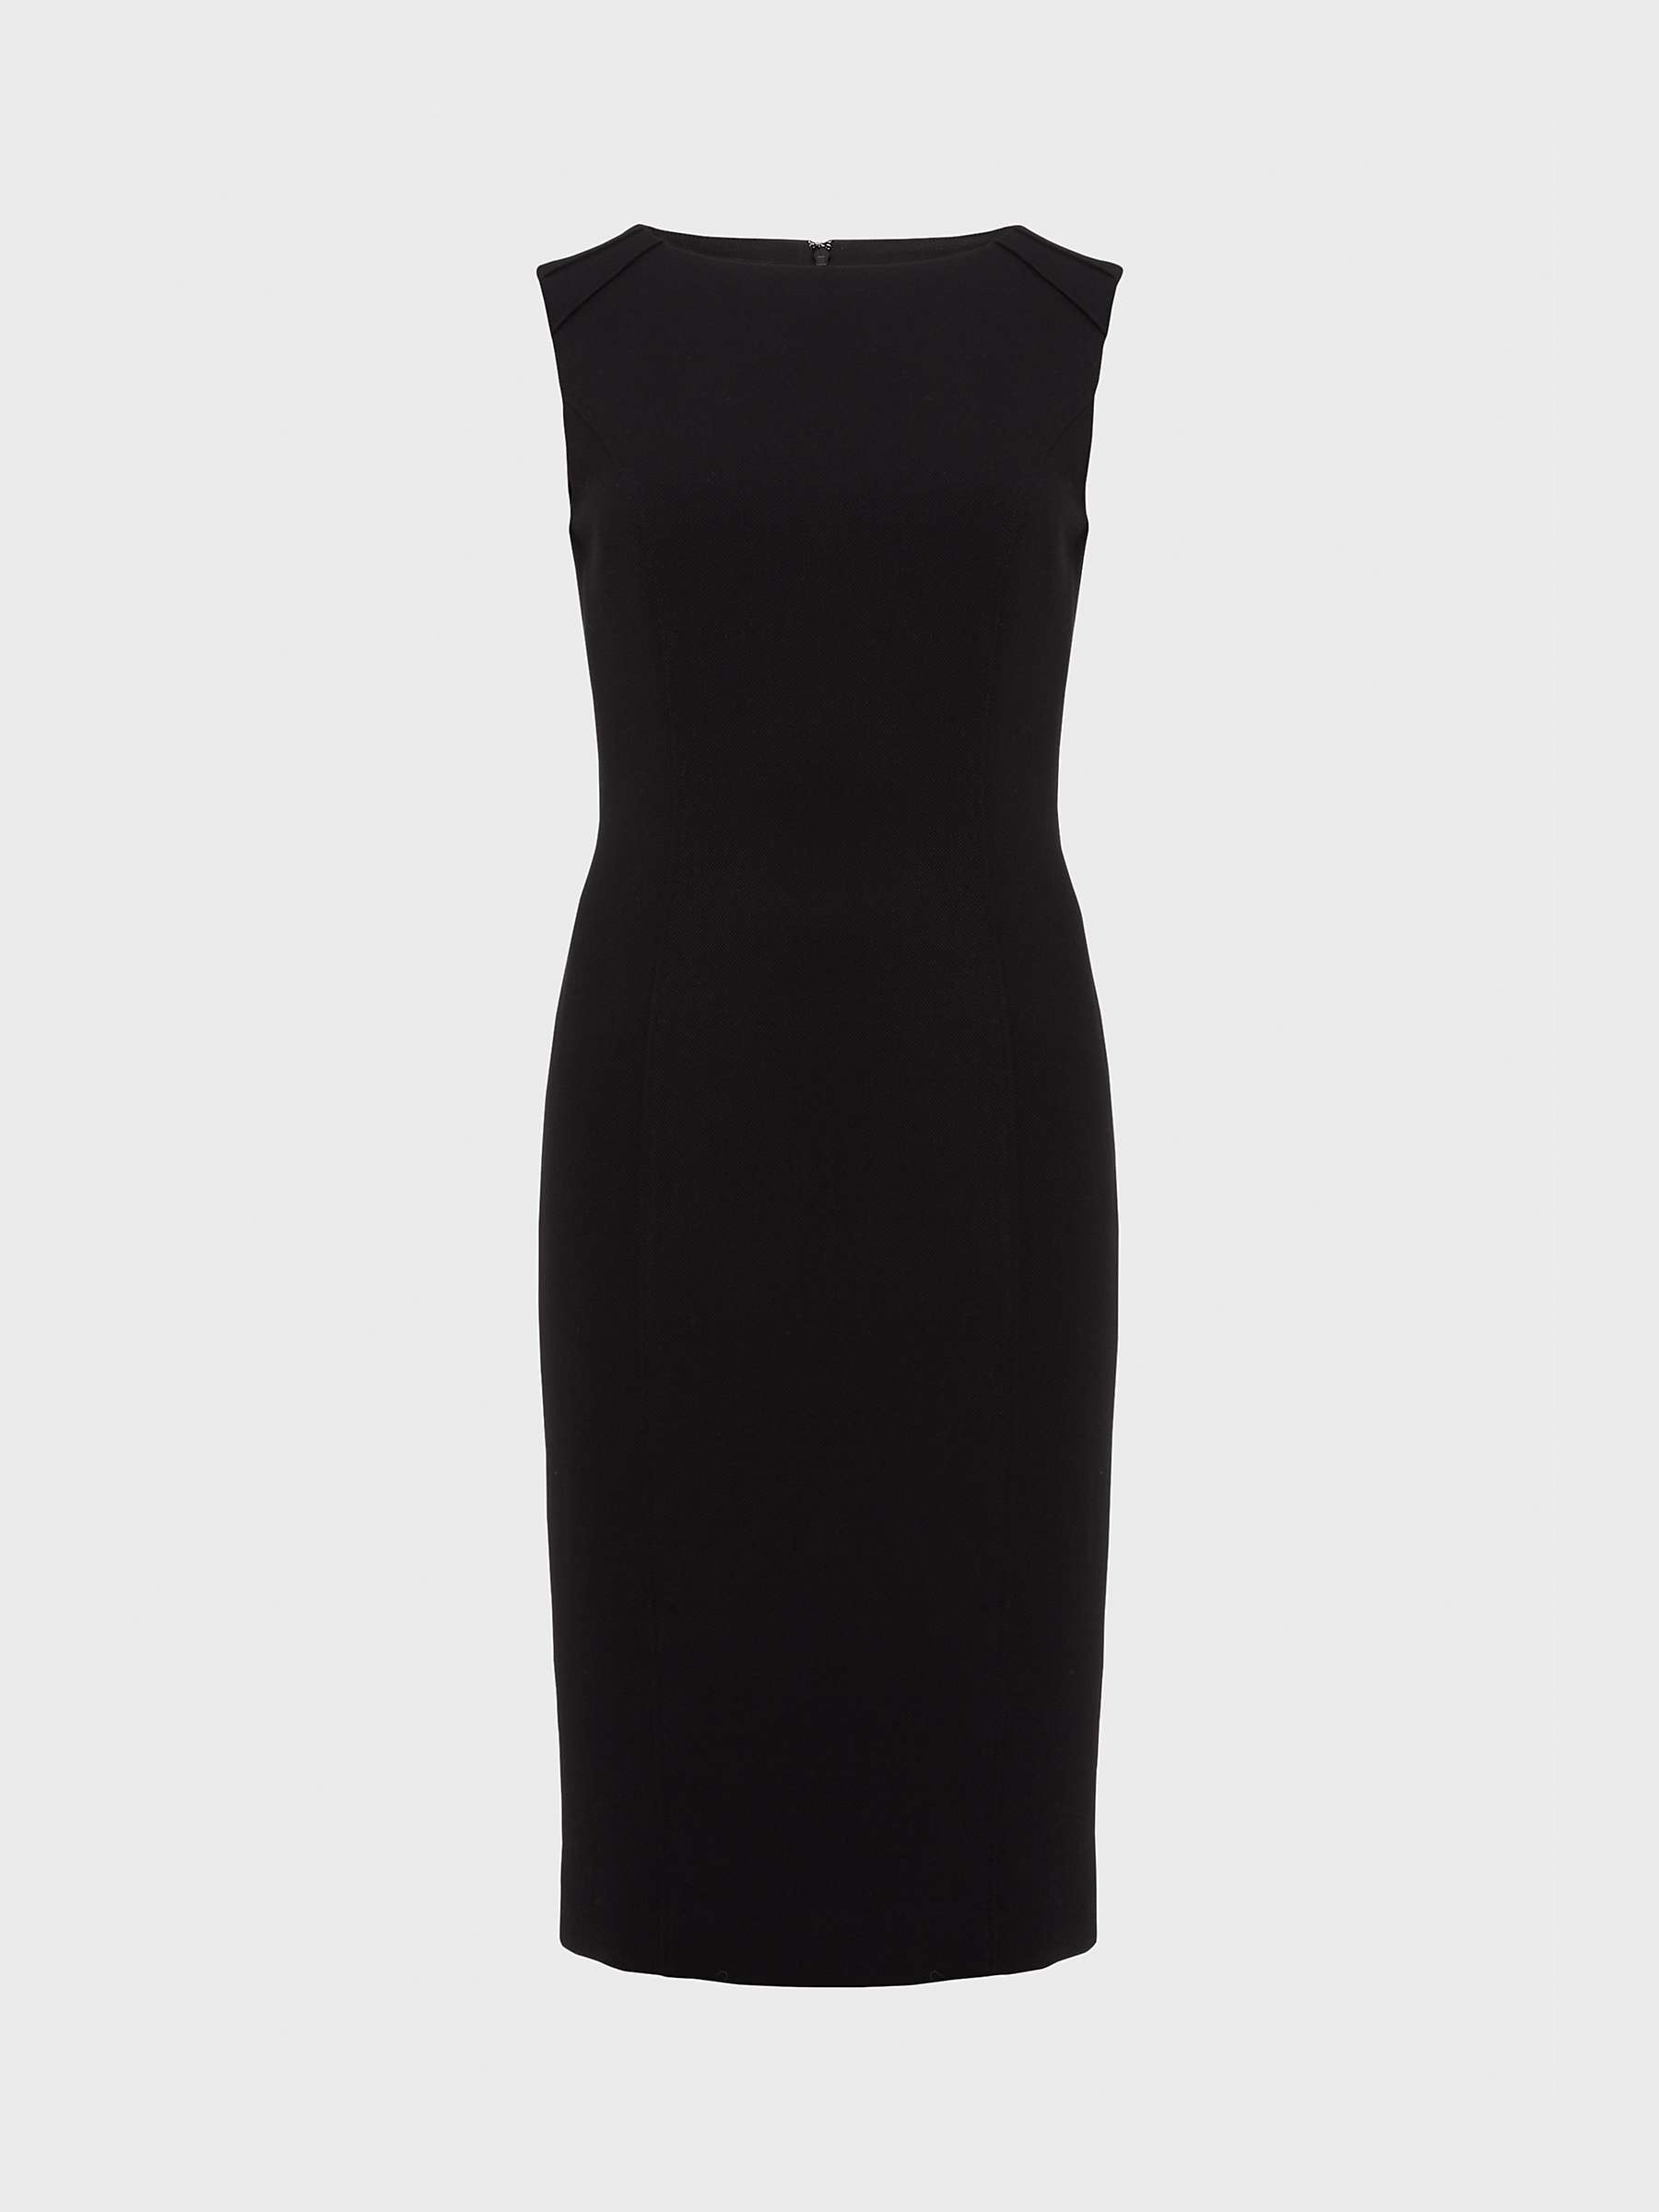 Hobbs Charley Fitted Dress, Black at John Lewis & Partners